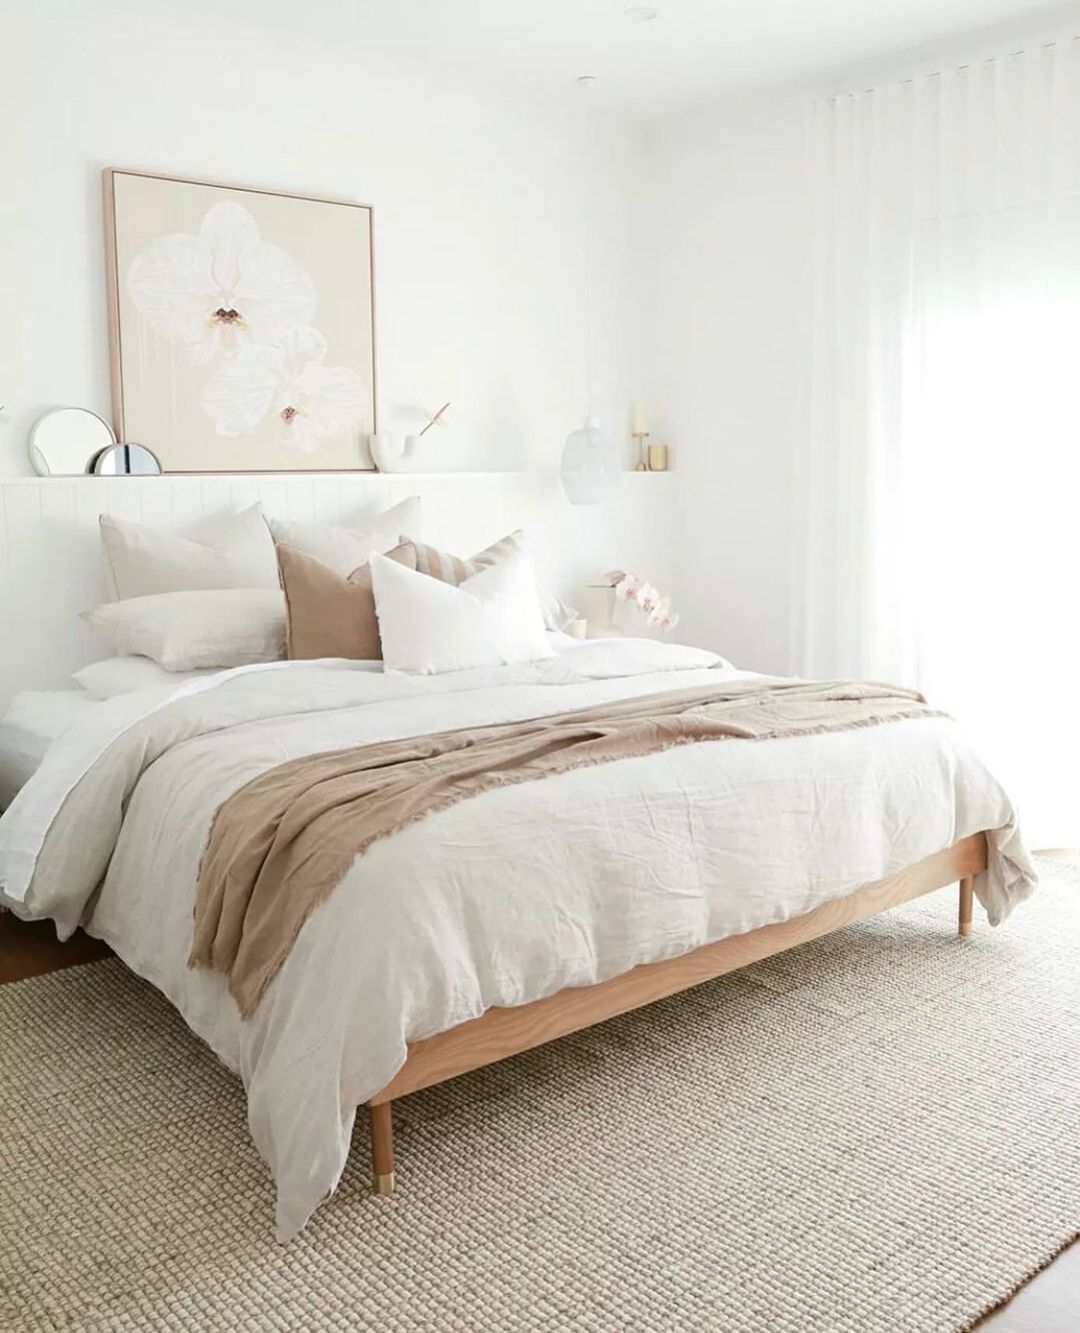 12. Create a Tranquil Haven with Soft Neutrals and Light Linens